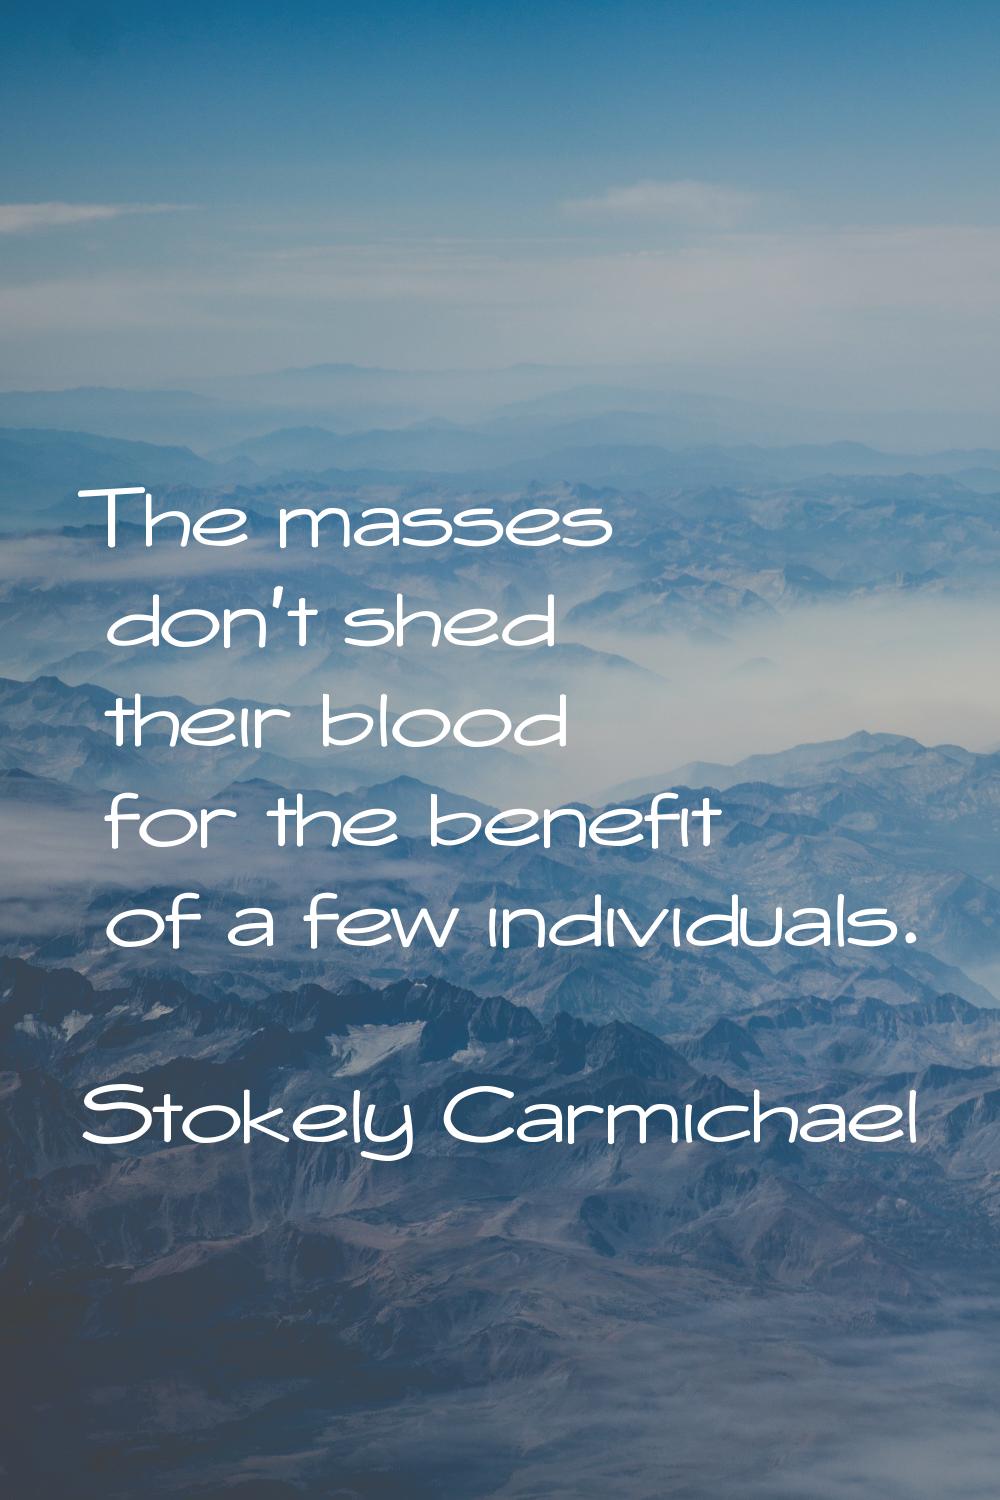 The masses don't shed their blood for the benefit of a few individuals.